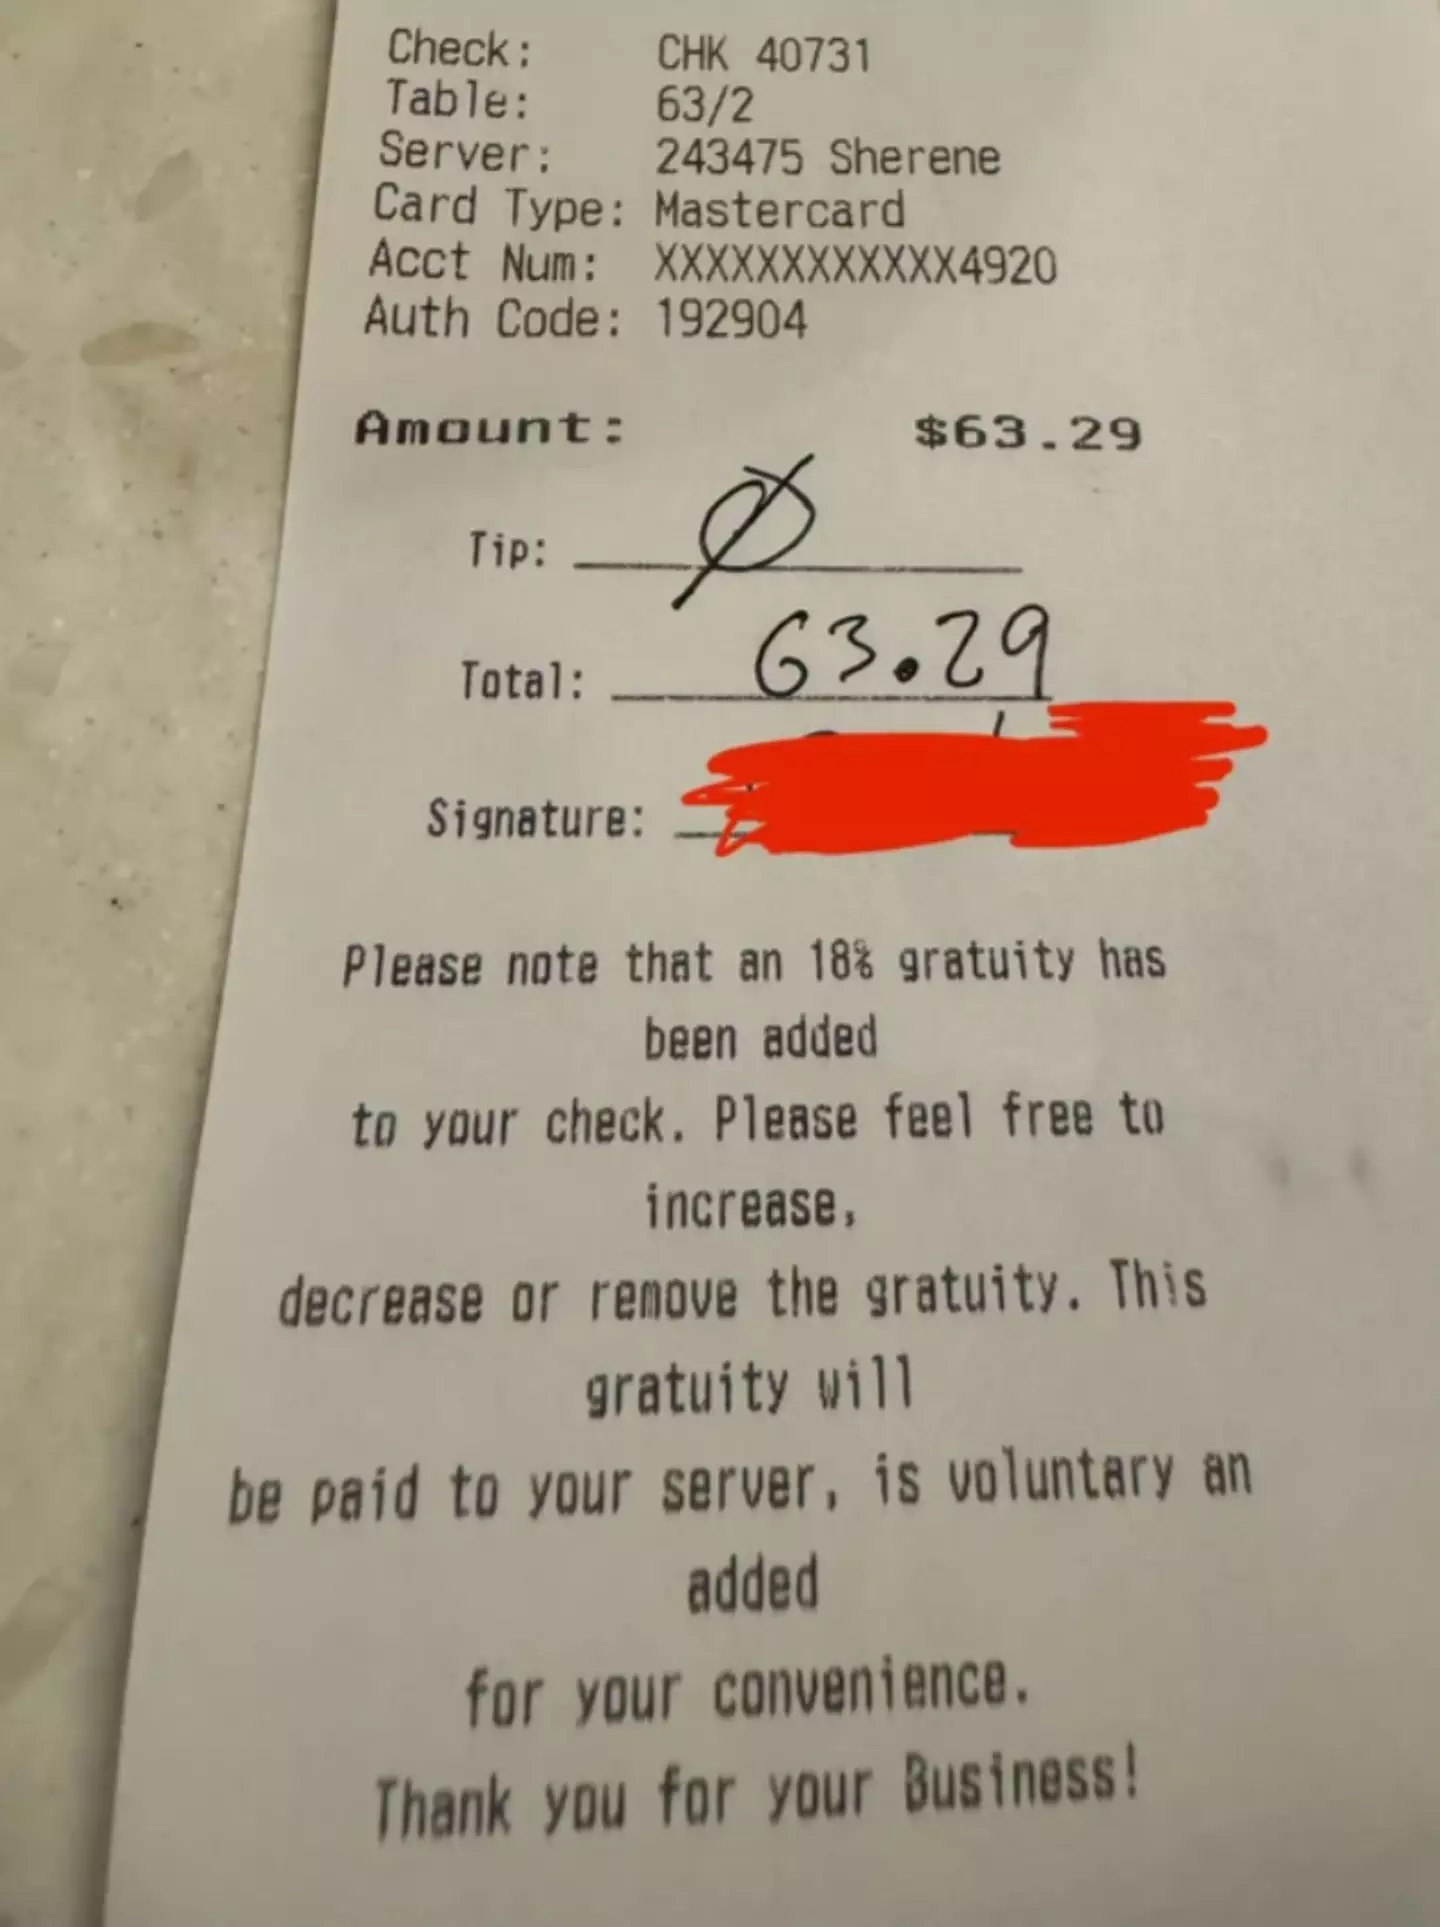 The customer decided not to leave a tip.